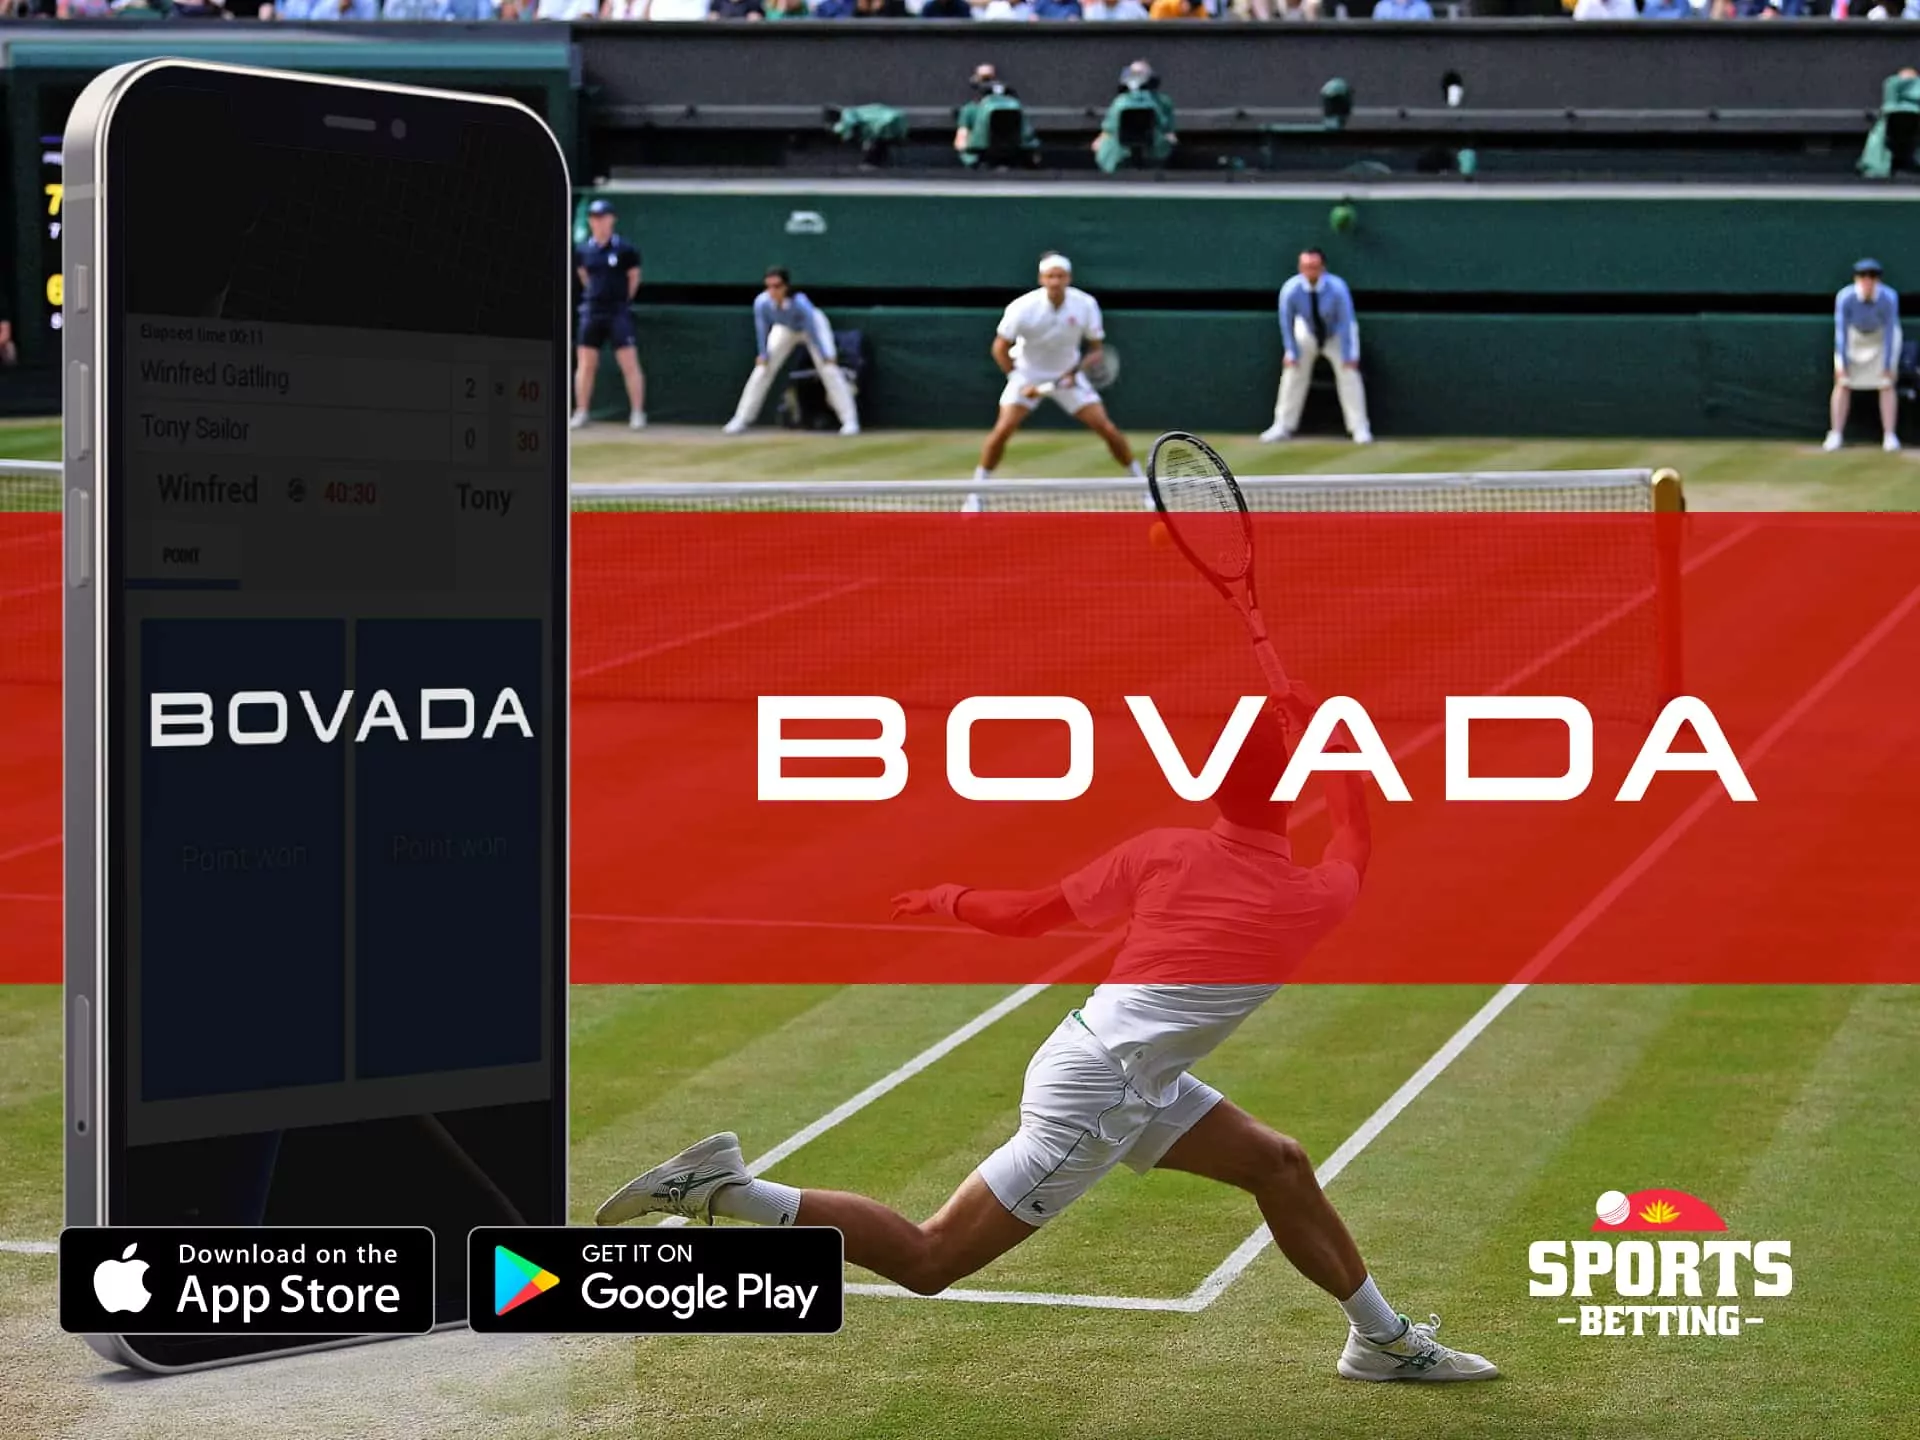 Bovada tennis betting app with a lot of different ways to gamble on tennis.